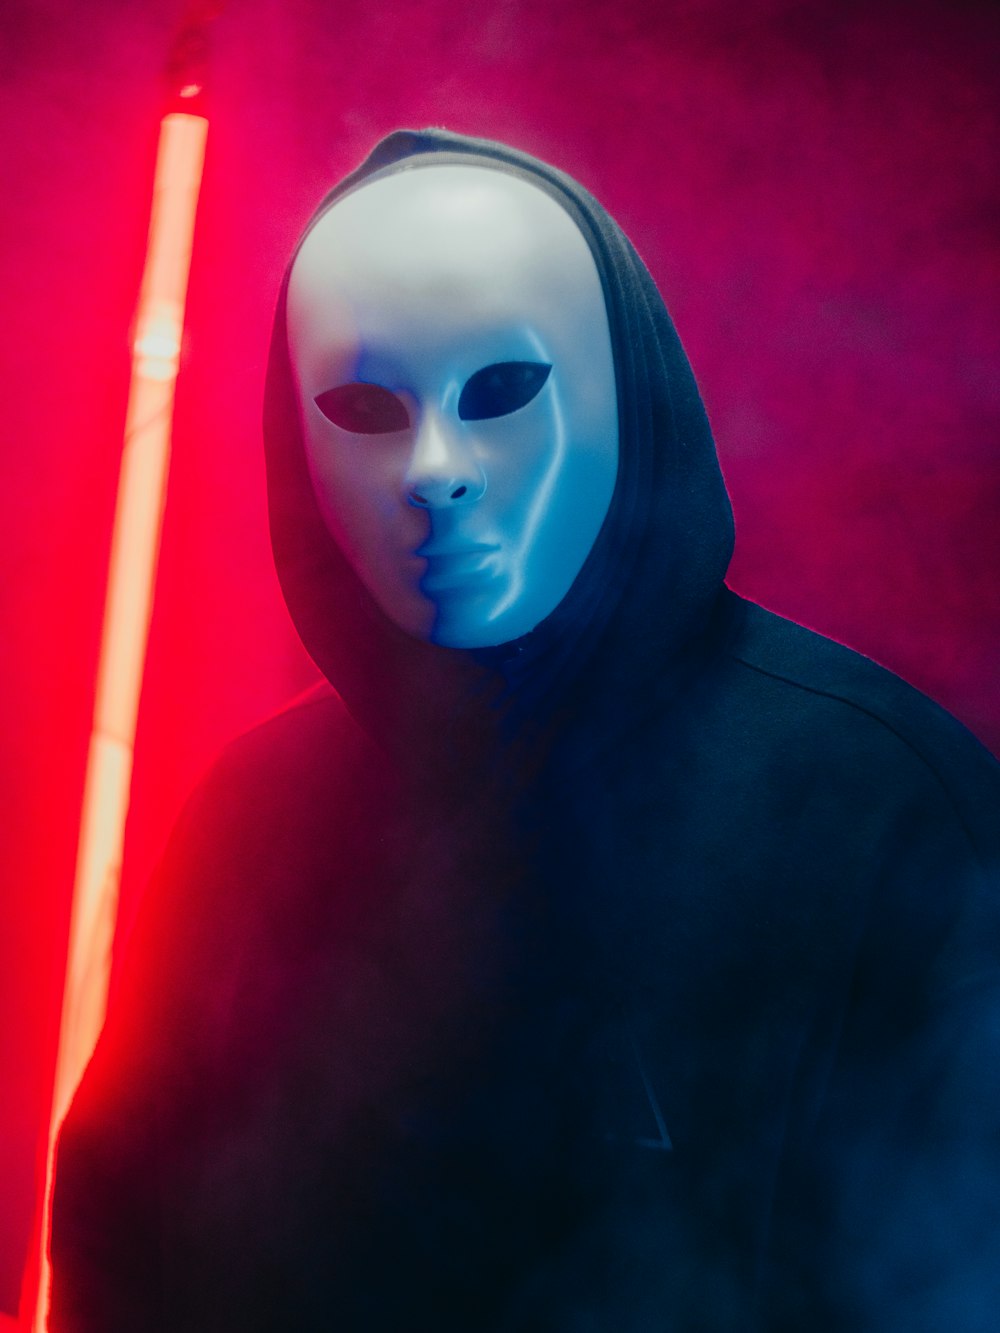 a man wearing a mask and holding a light saber